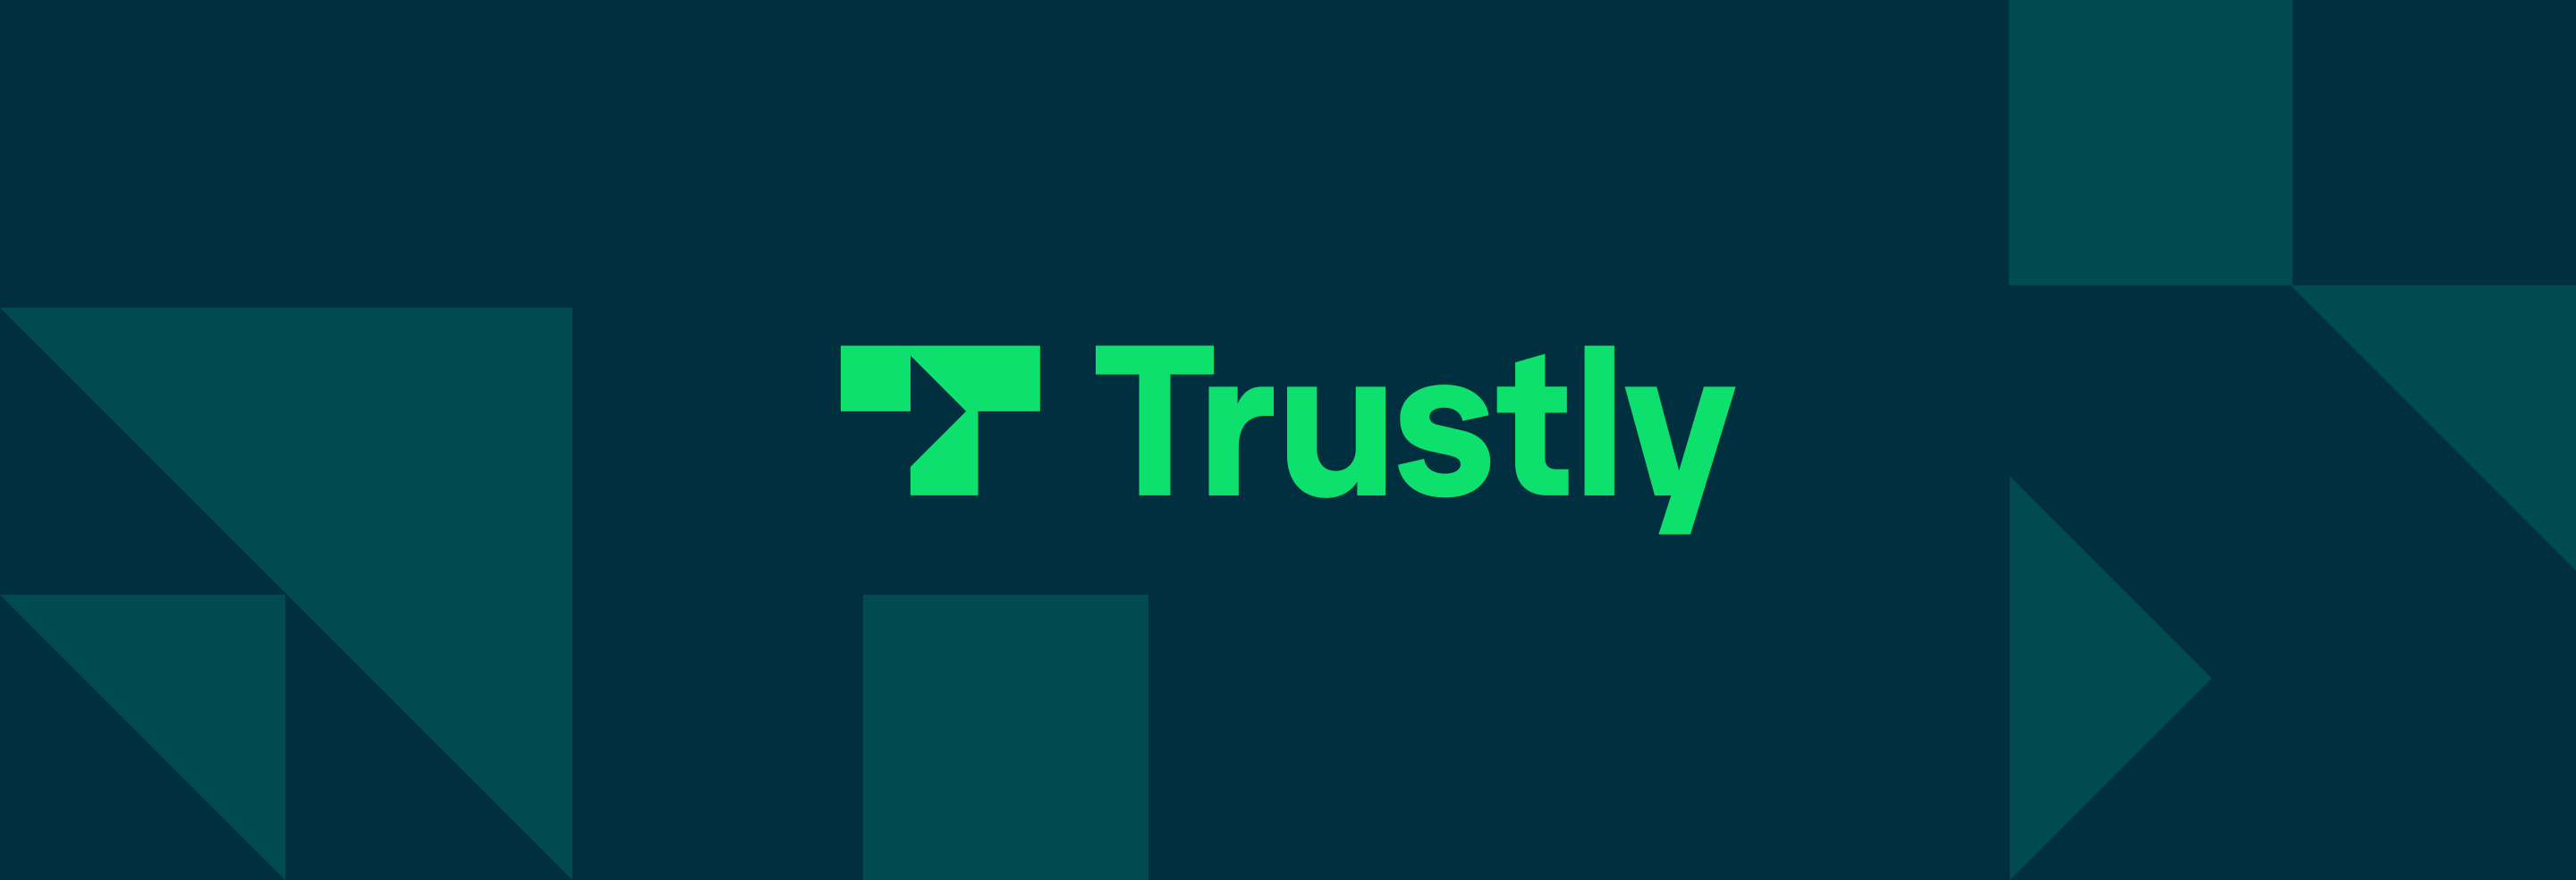 Trustly introduces FlexPay by Trustly, a deferred settlement product for flexible payments